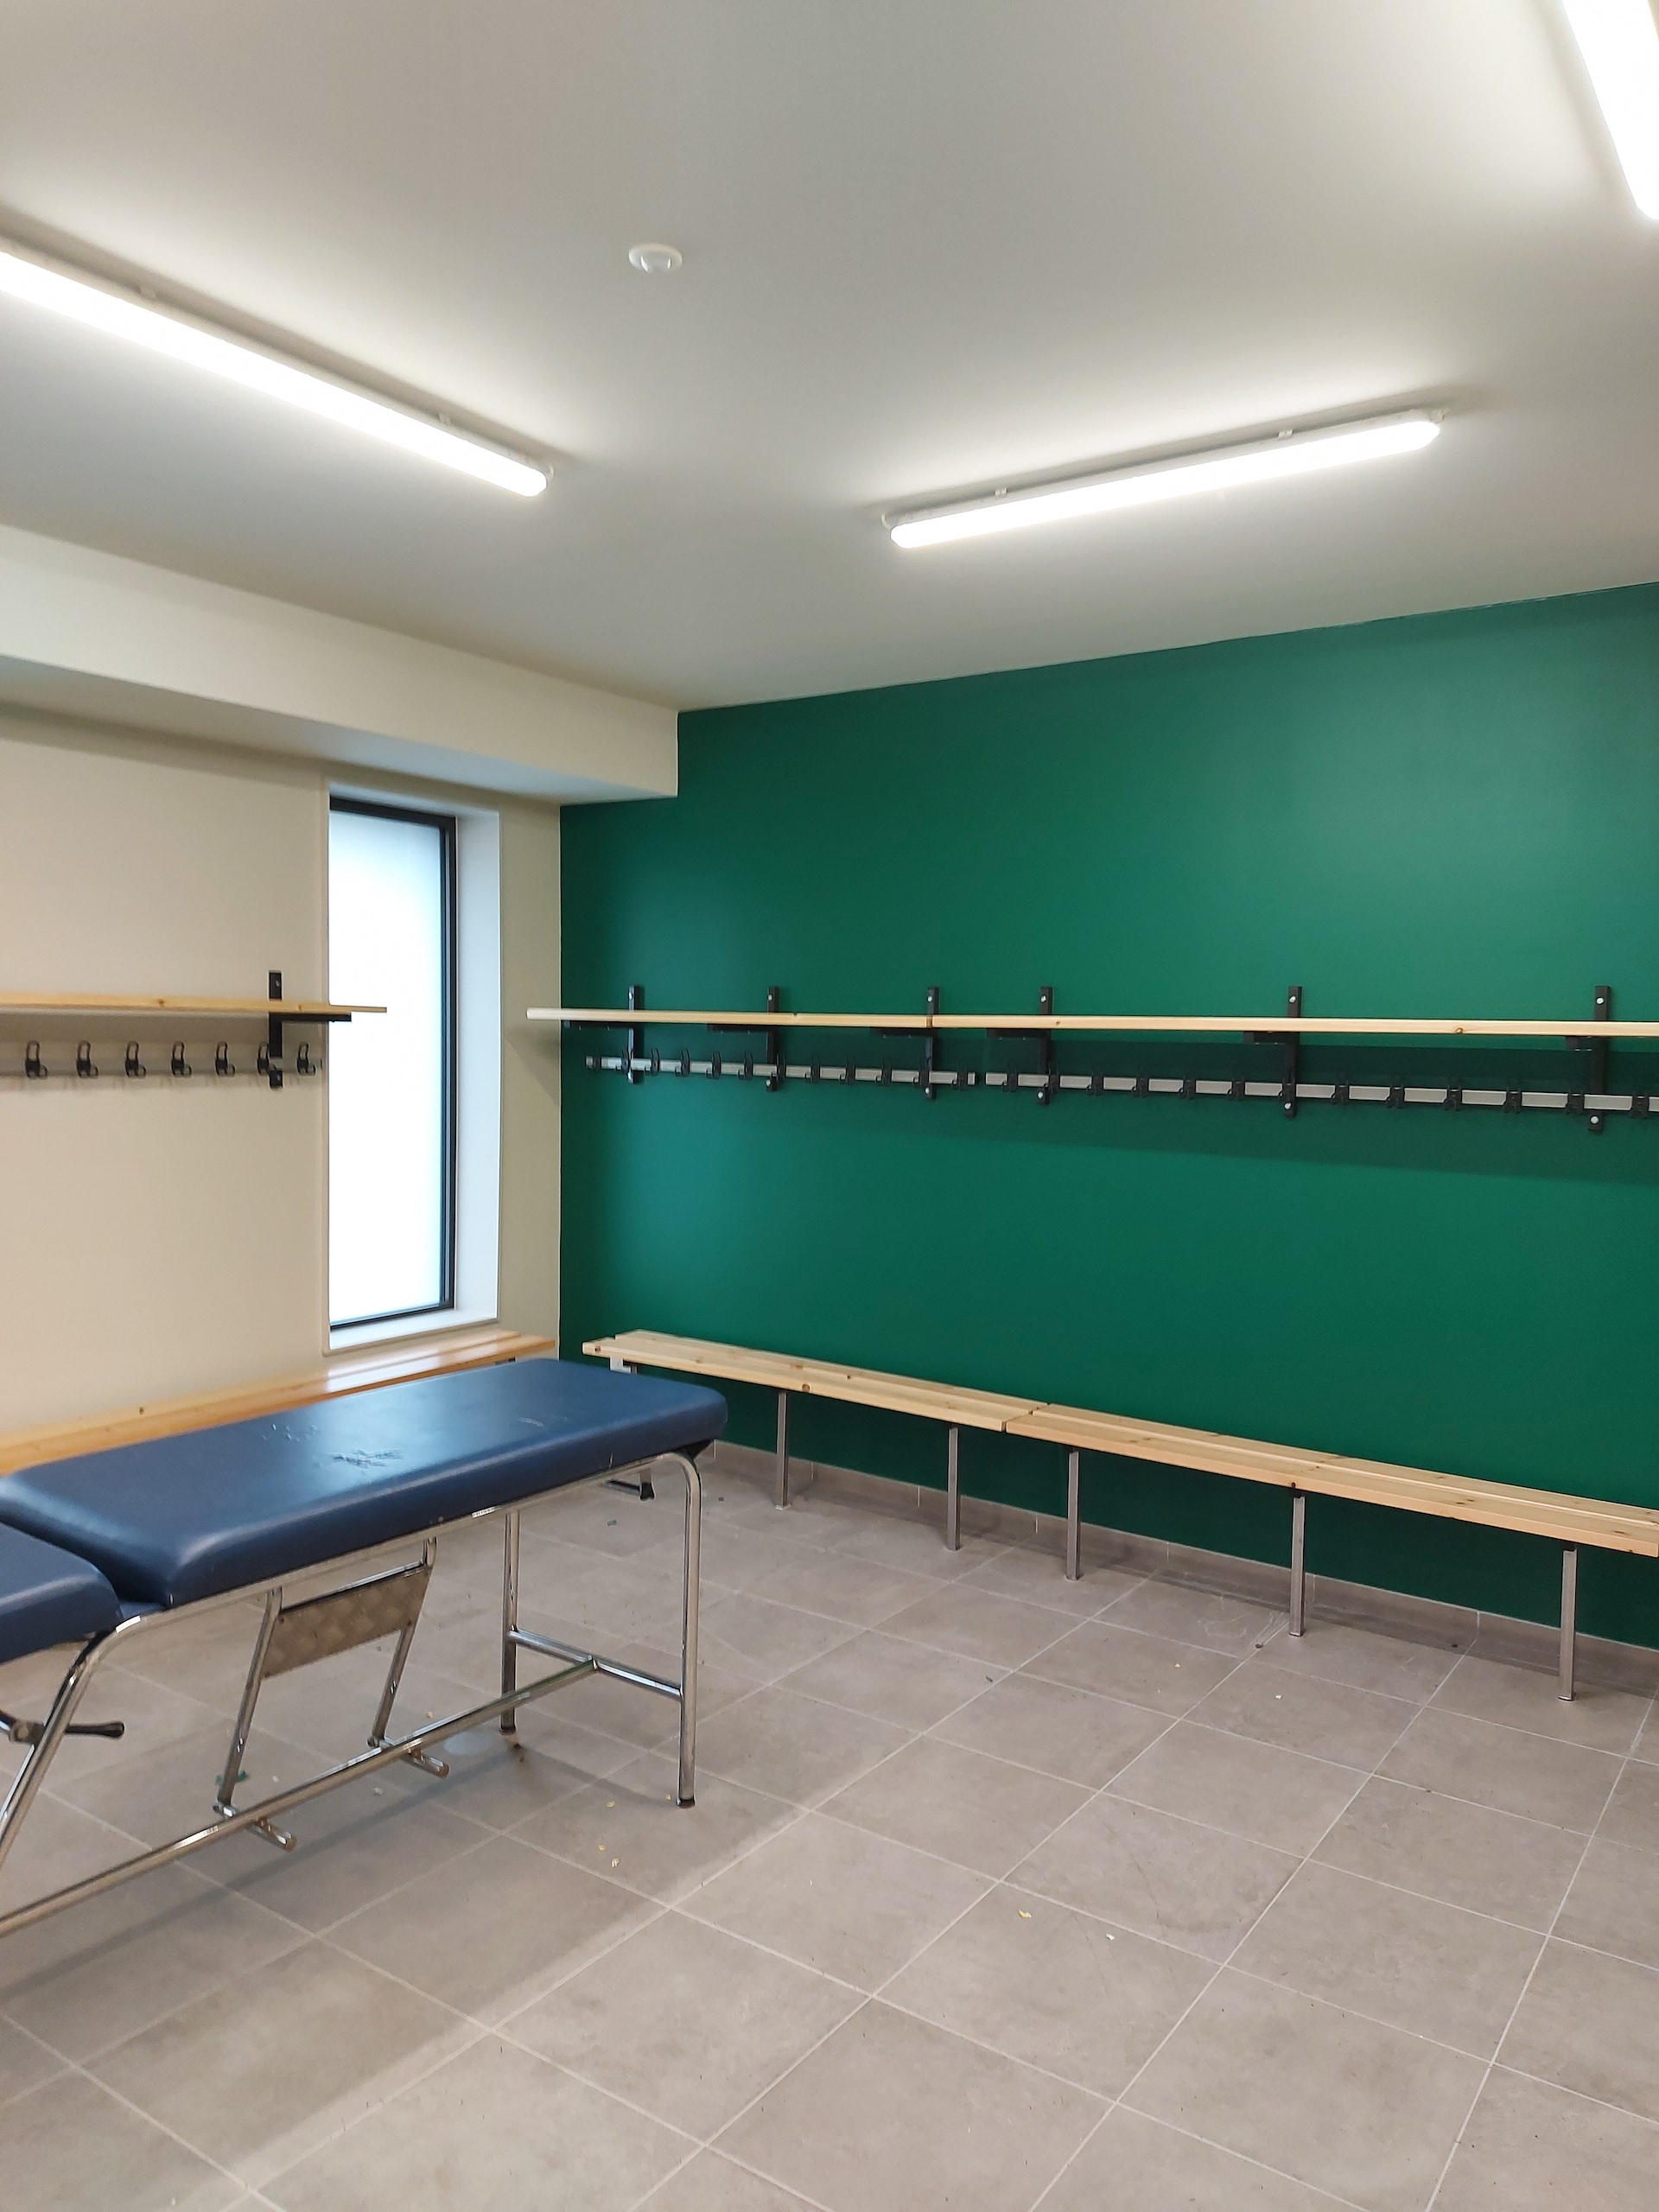 Renovation of the sanitary facilities and changing rooms of the sports complex : Le Stadium in Villeneuve-d&#039;Ascq (59), realized by Kalysse, leader in sanitary facilities and changing rooms for sports complexes and Arena